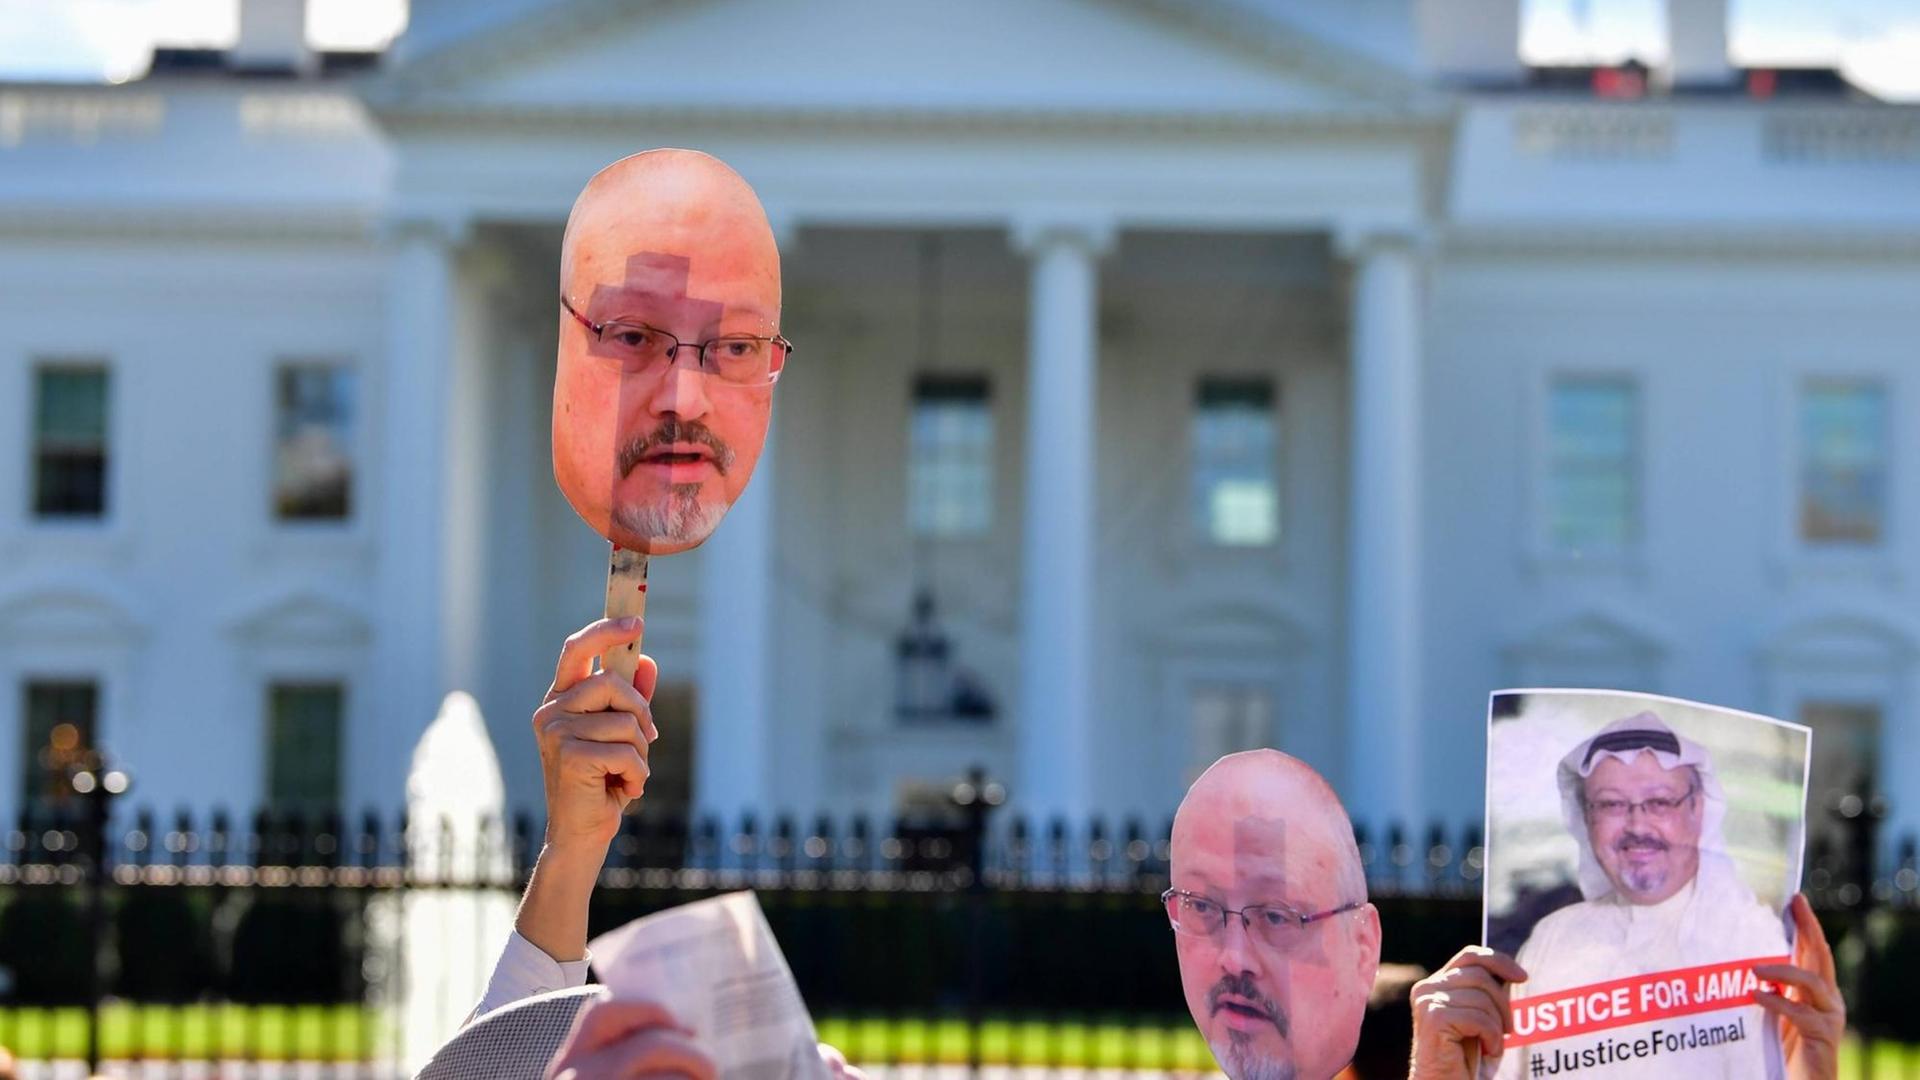 Protesters with the activist group Code Pink demonstrate outside the White House to call attention to the disappearance of Saudi Arabian journalist Jamal Khashoggi, in Washington, D.C. on October 19, 2018. Khashoggi has disappeared following a meeting at the Saudi consulate in Istanbul. PUBLICATIONxINxGERxSUIxAUTxHUNxONLY WAP20181019319 KEVINxDIETSCH